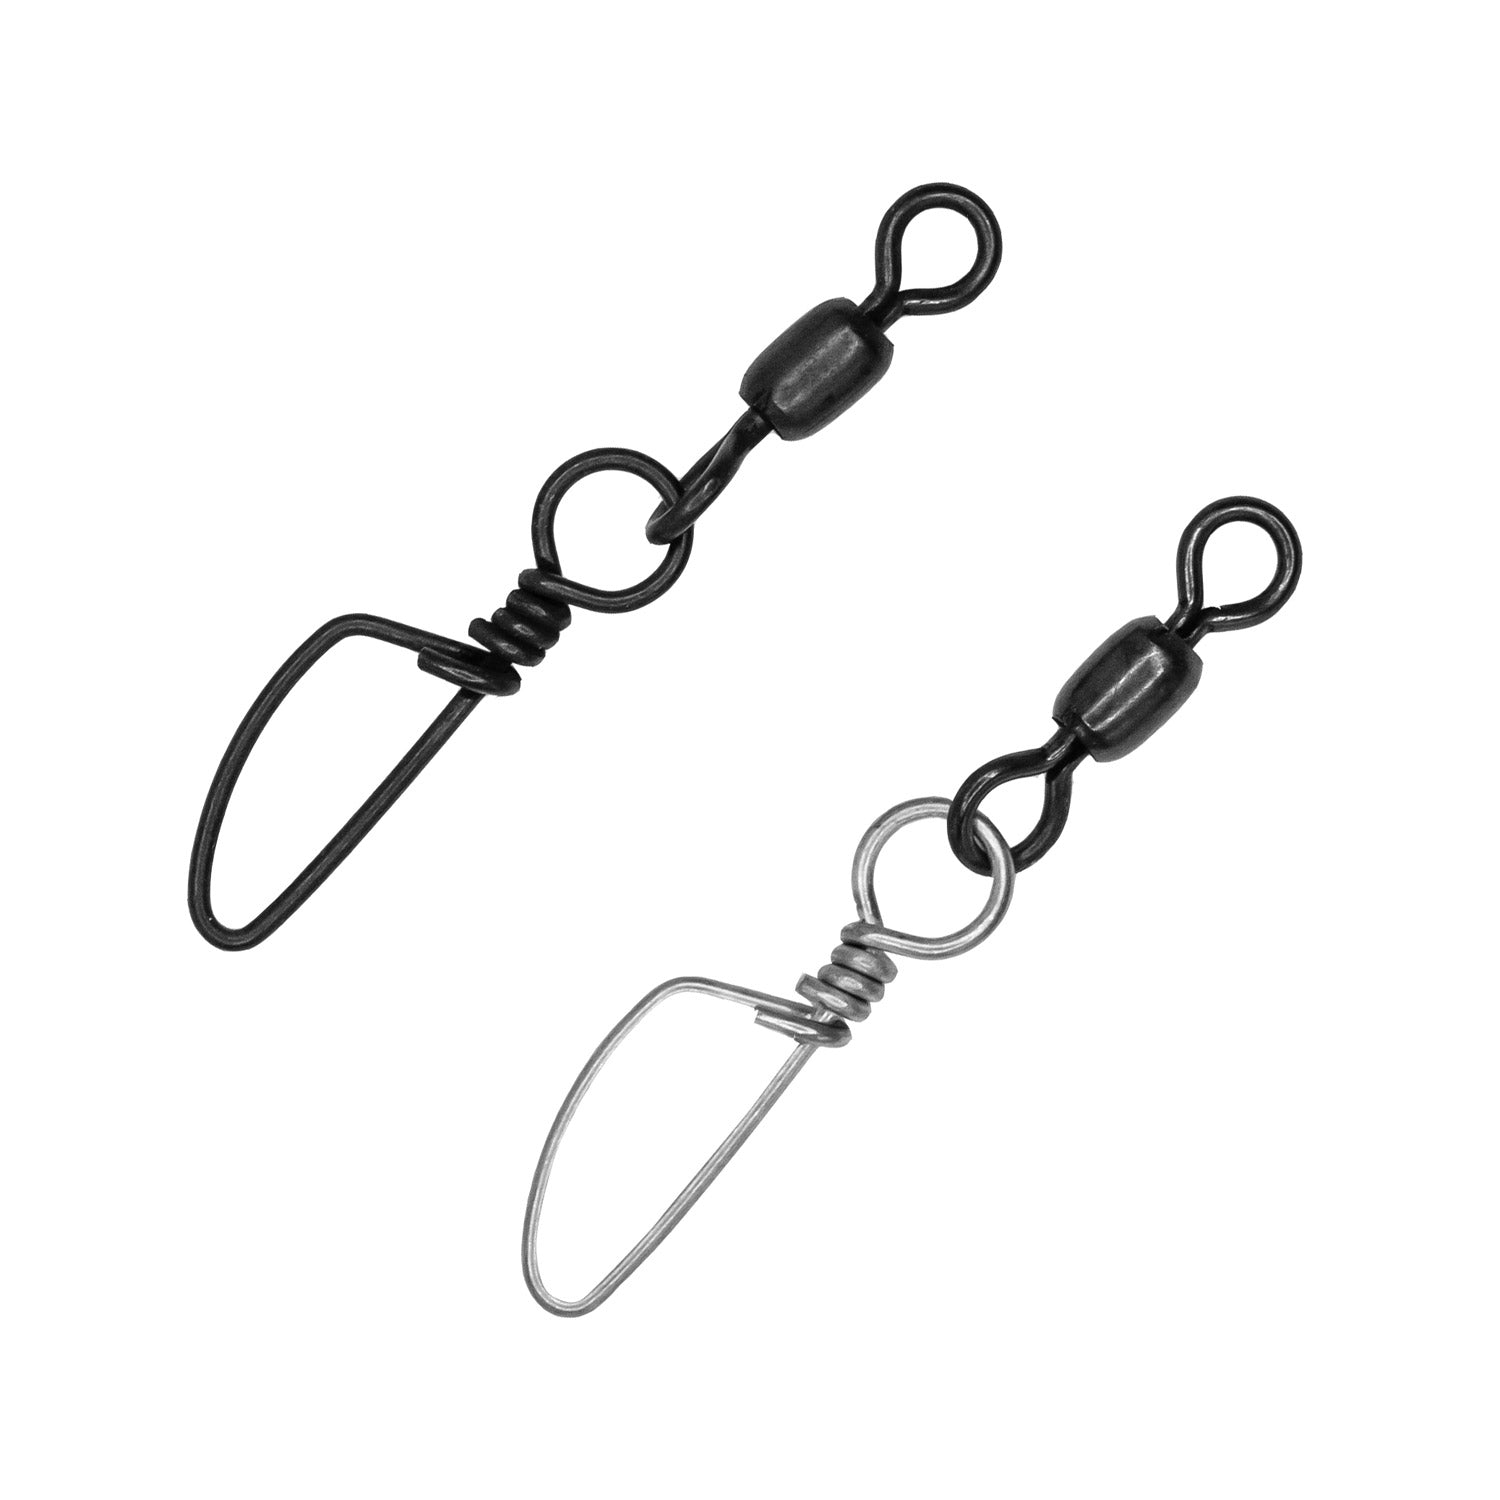 Fishing Barrel Swivel with Safety Snap, 50Pcs 22lb Carbon Steel, Black